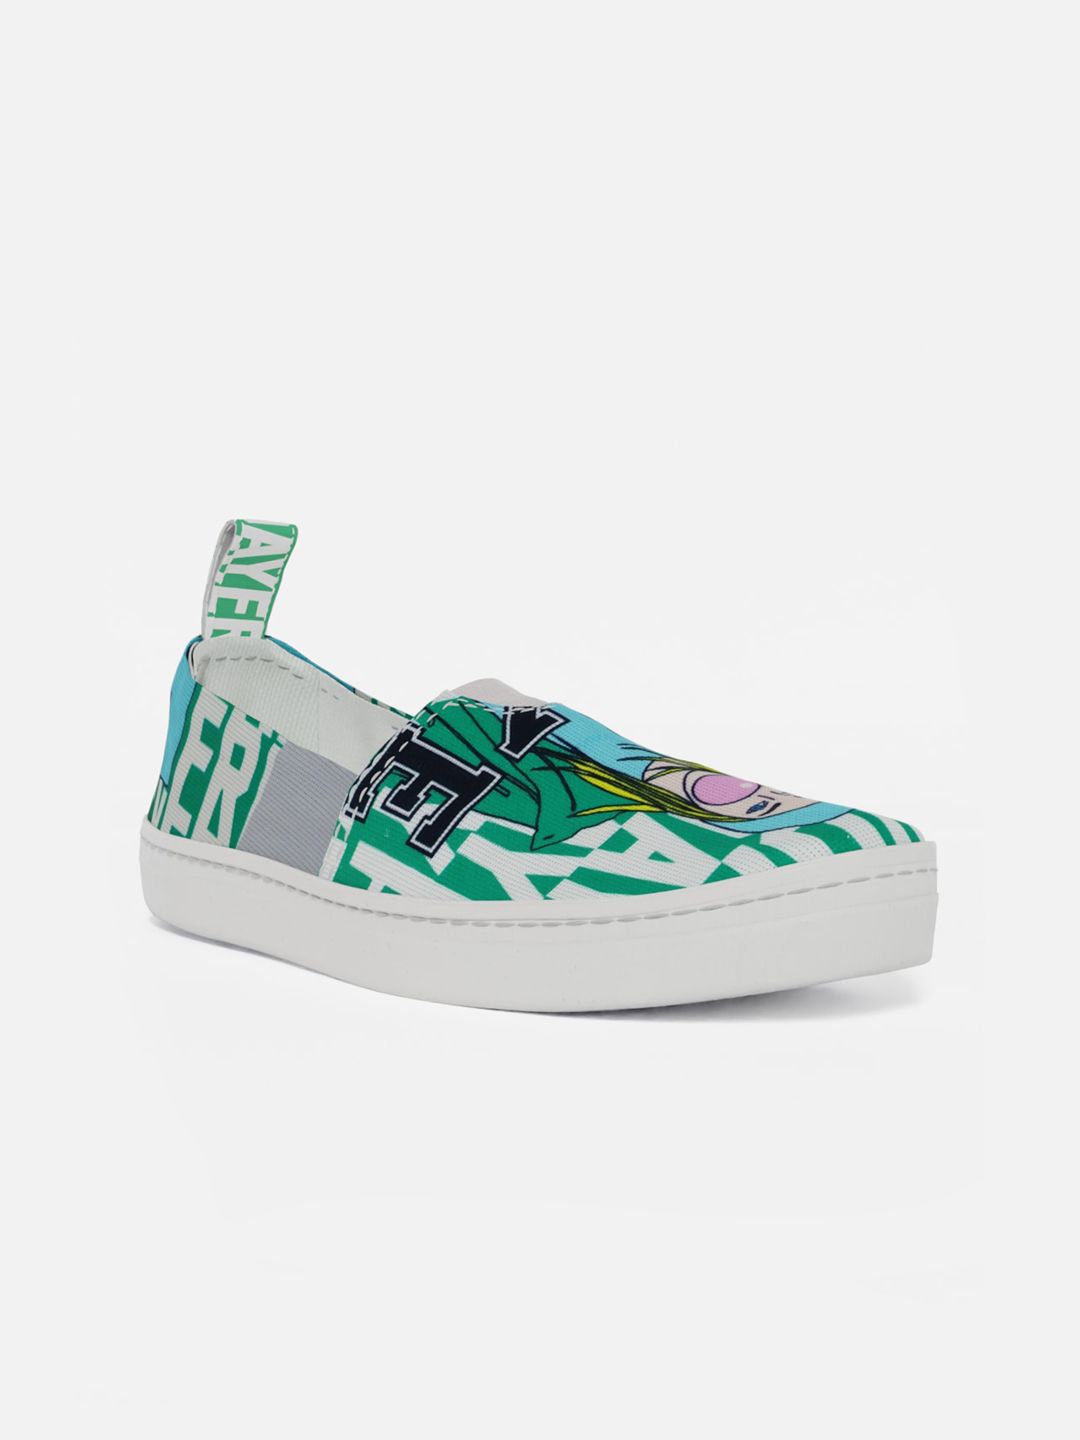 LOKAIT The Sneakers Company Women Green Printed Slip-On Sneakers Price in India